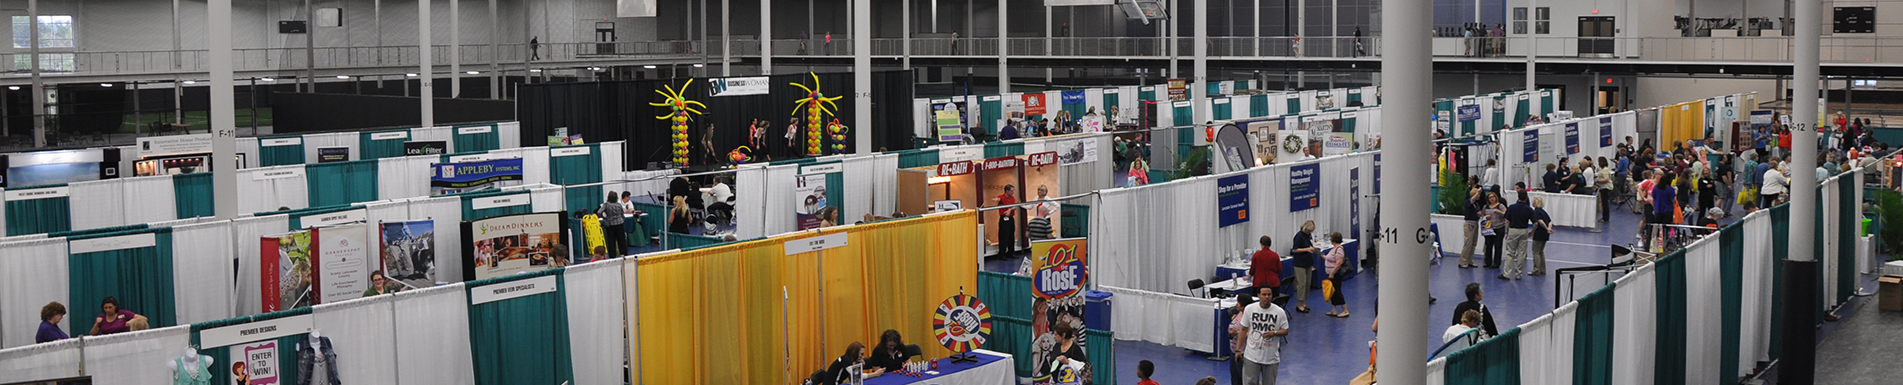 Trade show at Spooky Nook Meetings & Events